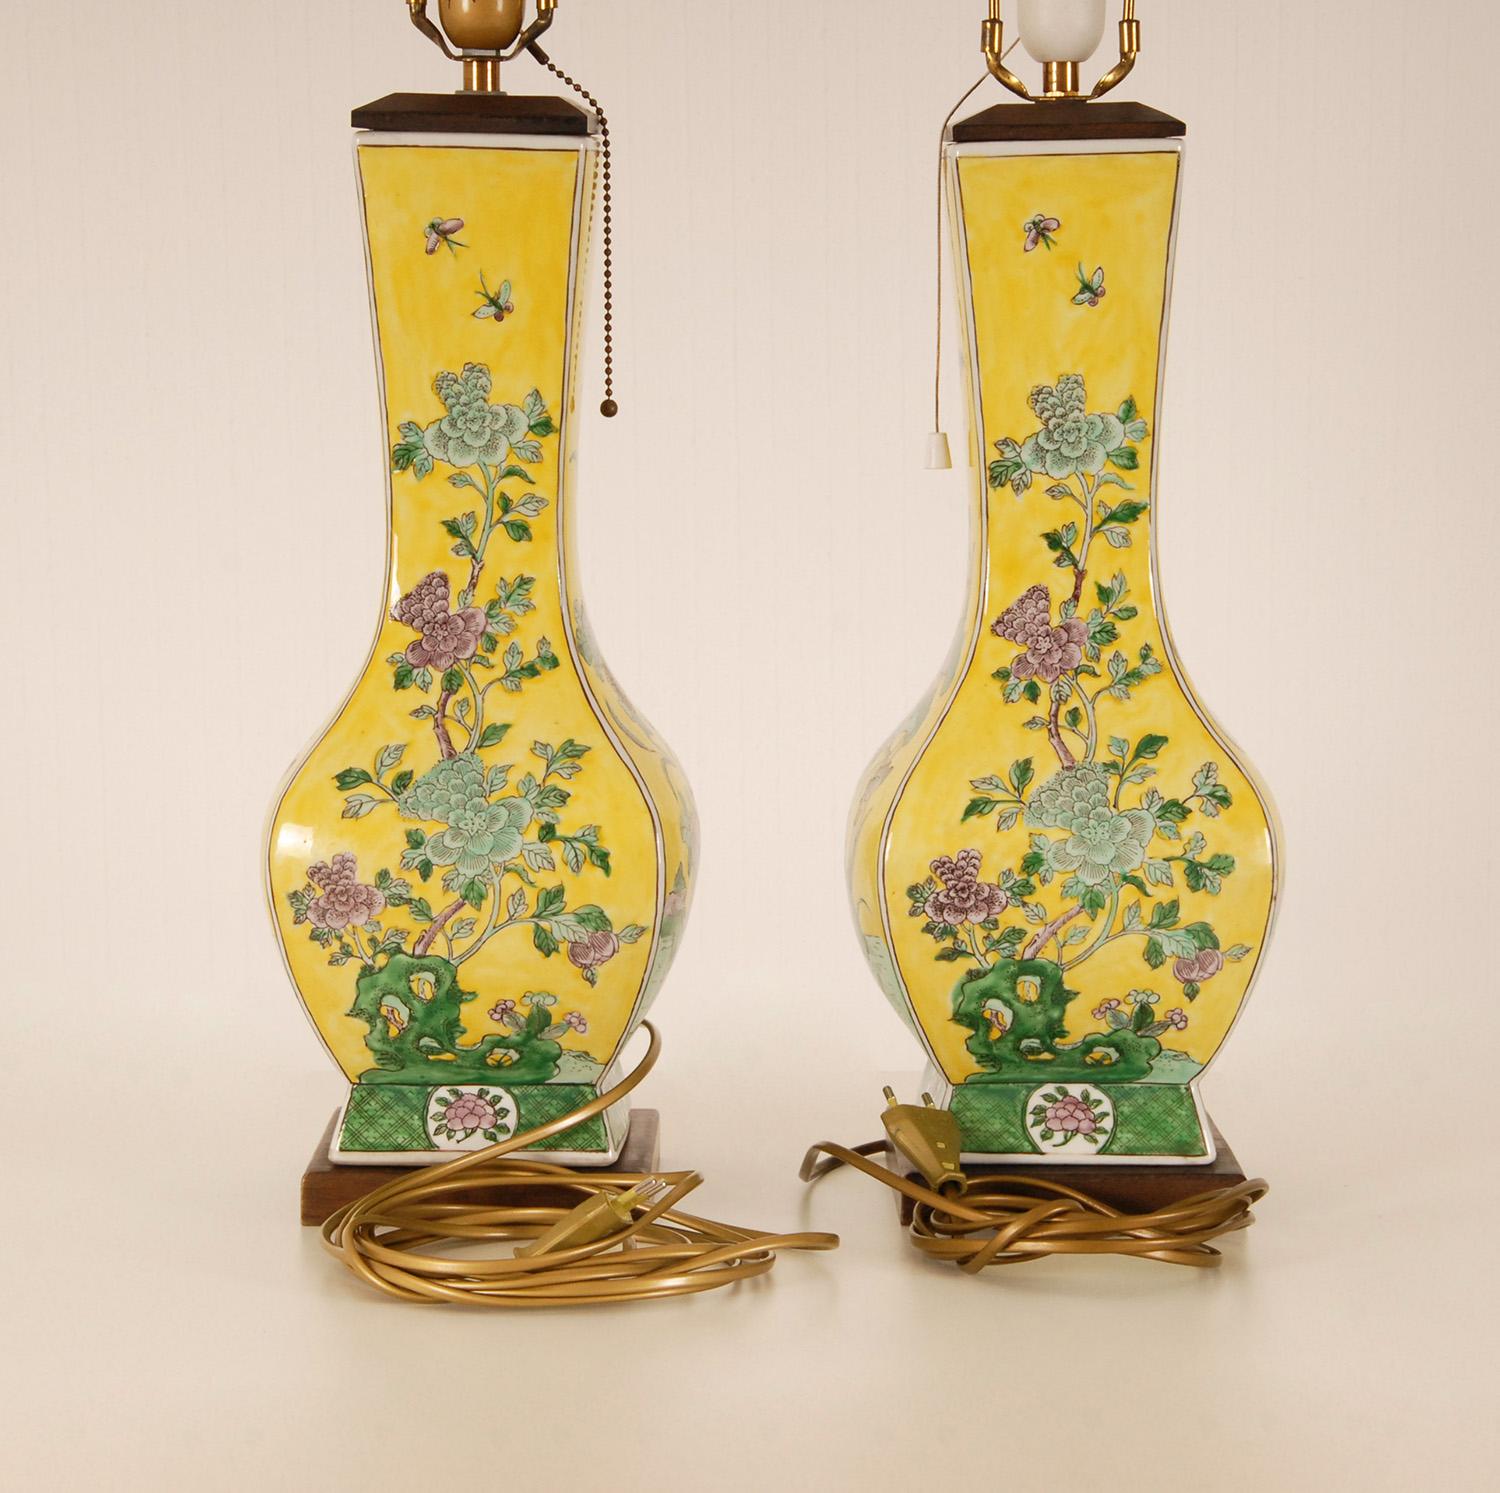 Asian Vintage Ceramic Chinoiserie Lamps Famille Jaune and Famille Verte Table Lamps